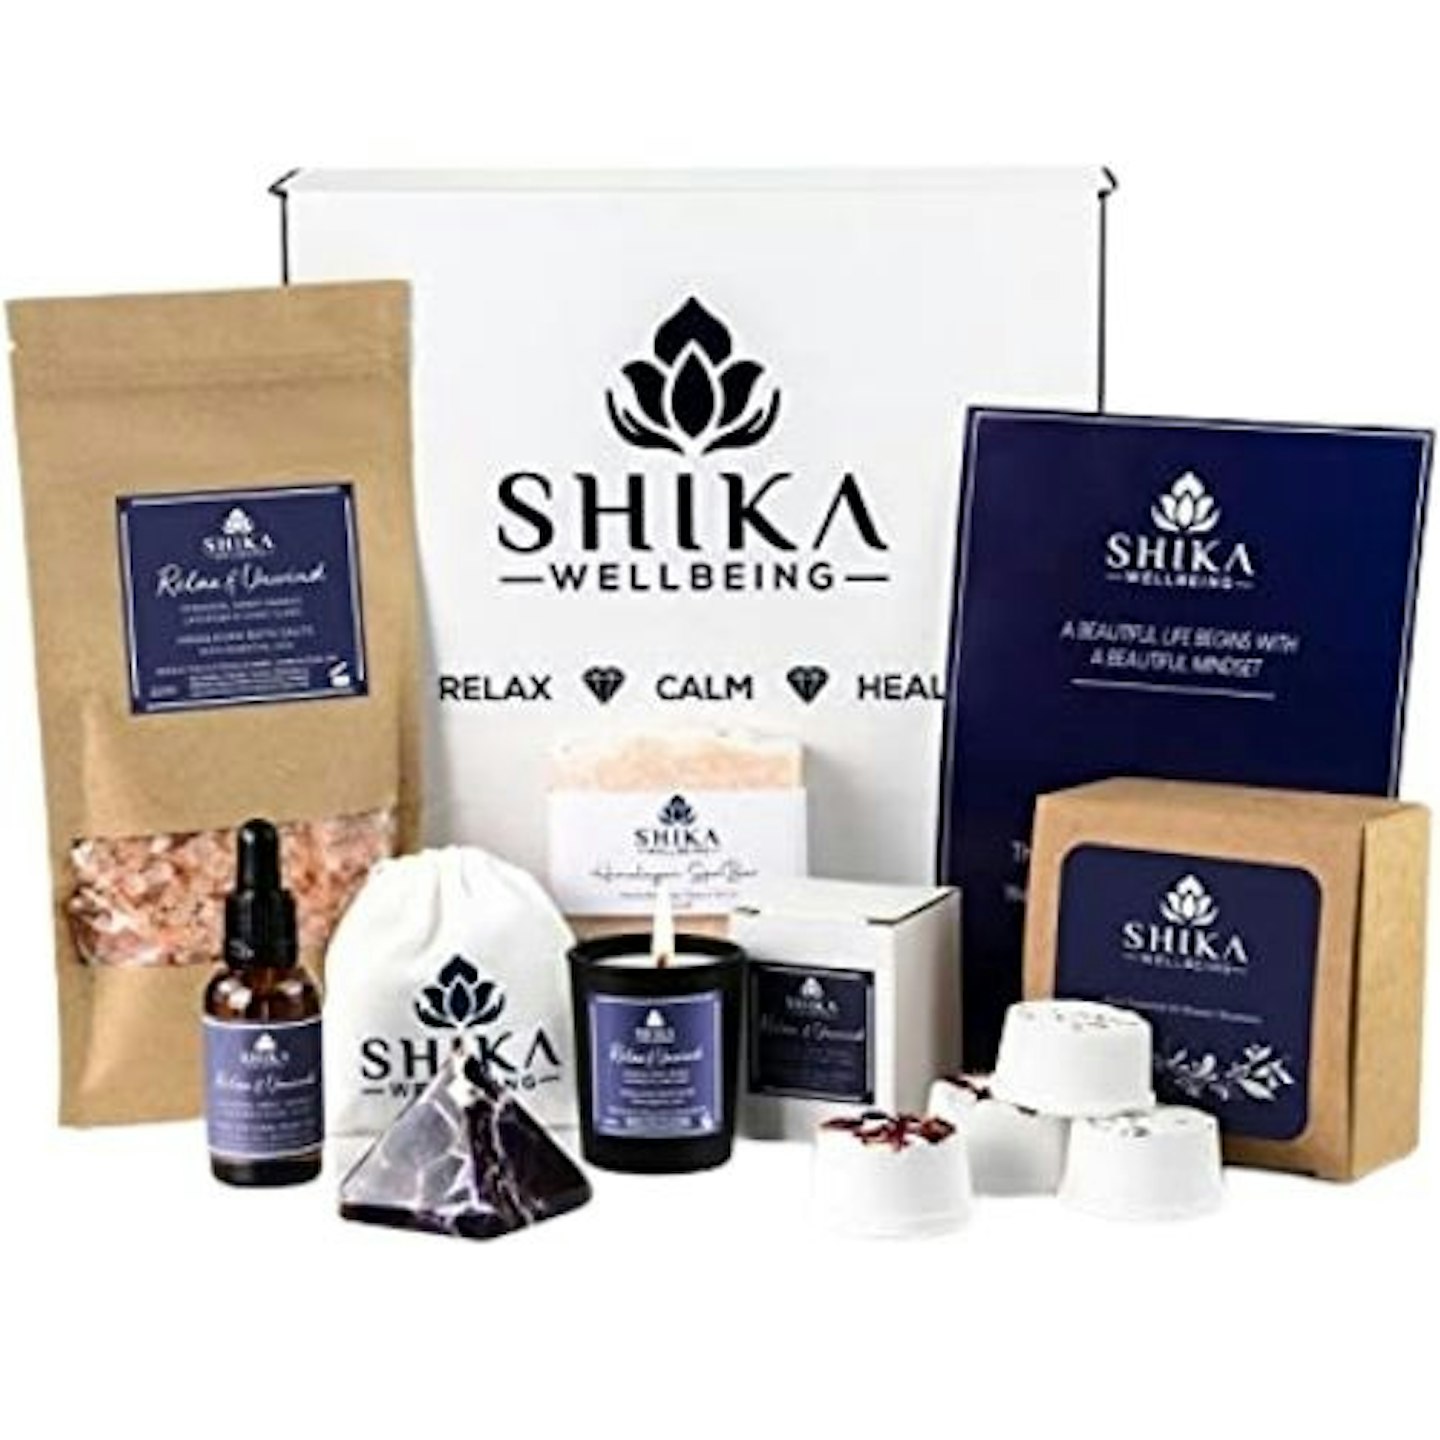 Shika wellbeing gifts for women